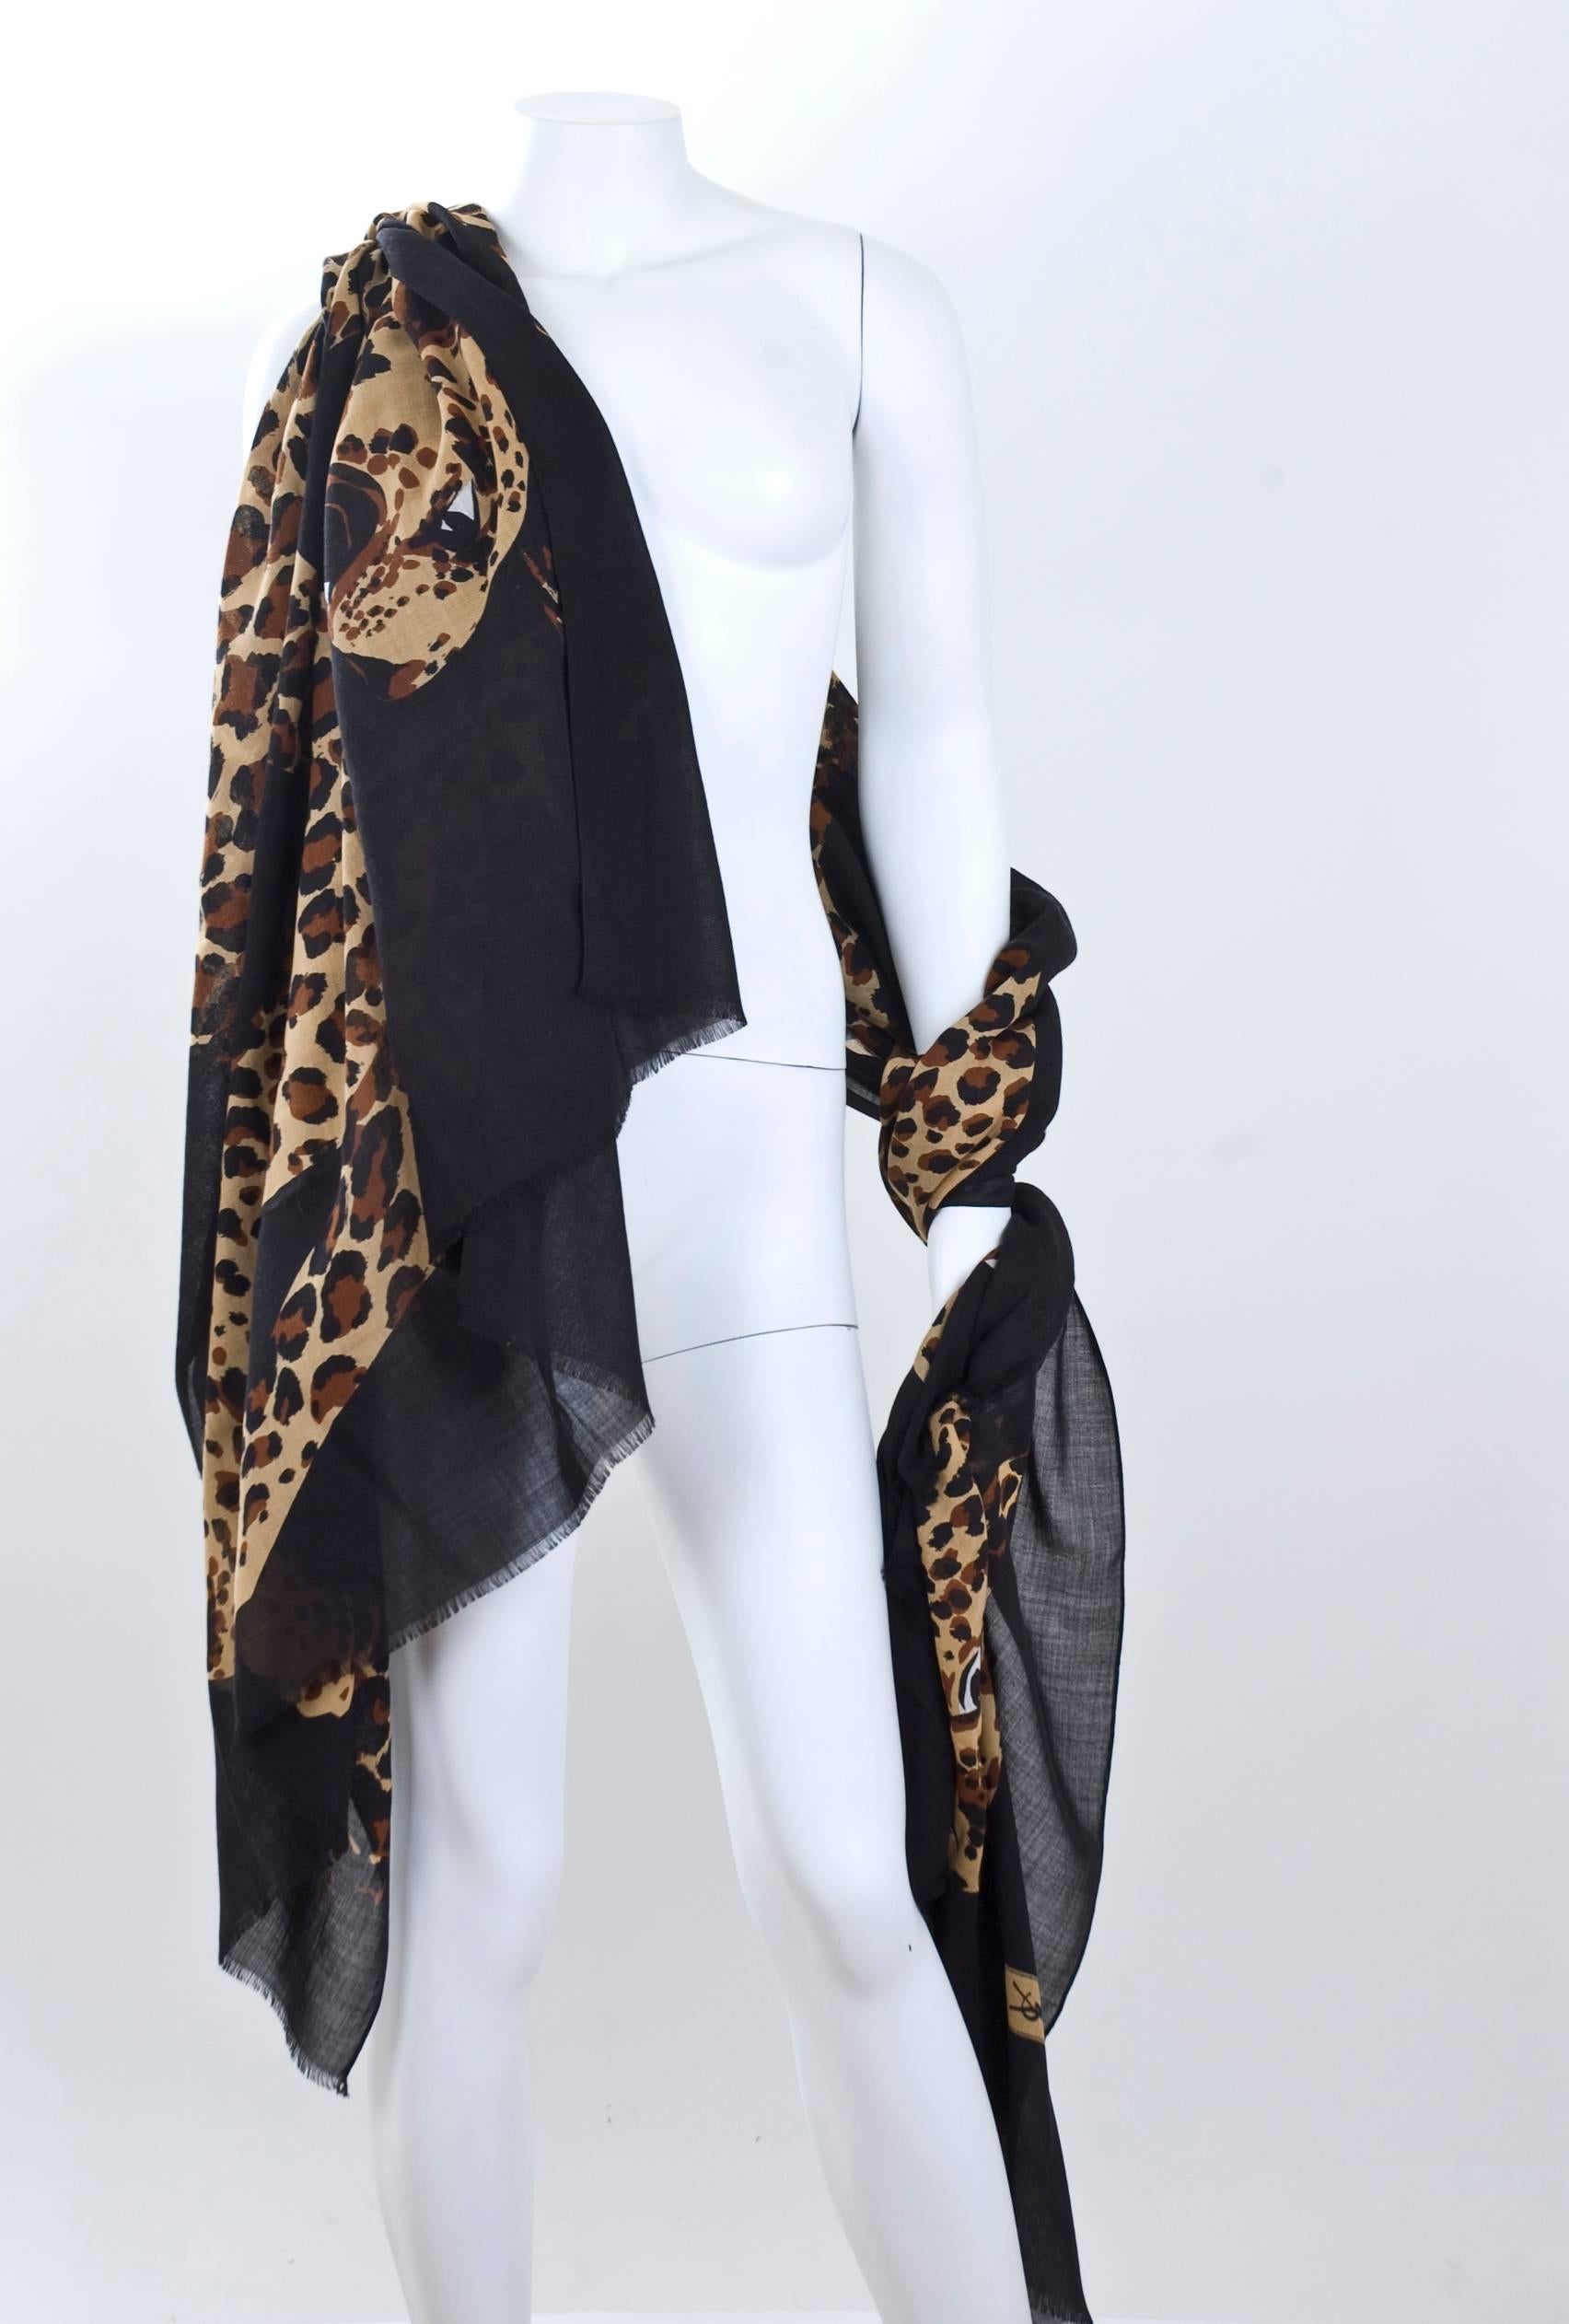 Yves Saint Laurent Vintage Giant Scarf Wrap Sarong with Leopards 90x54, 1980s   In Excellent Condition For Sale In Hamburg, Deutschland